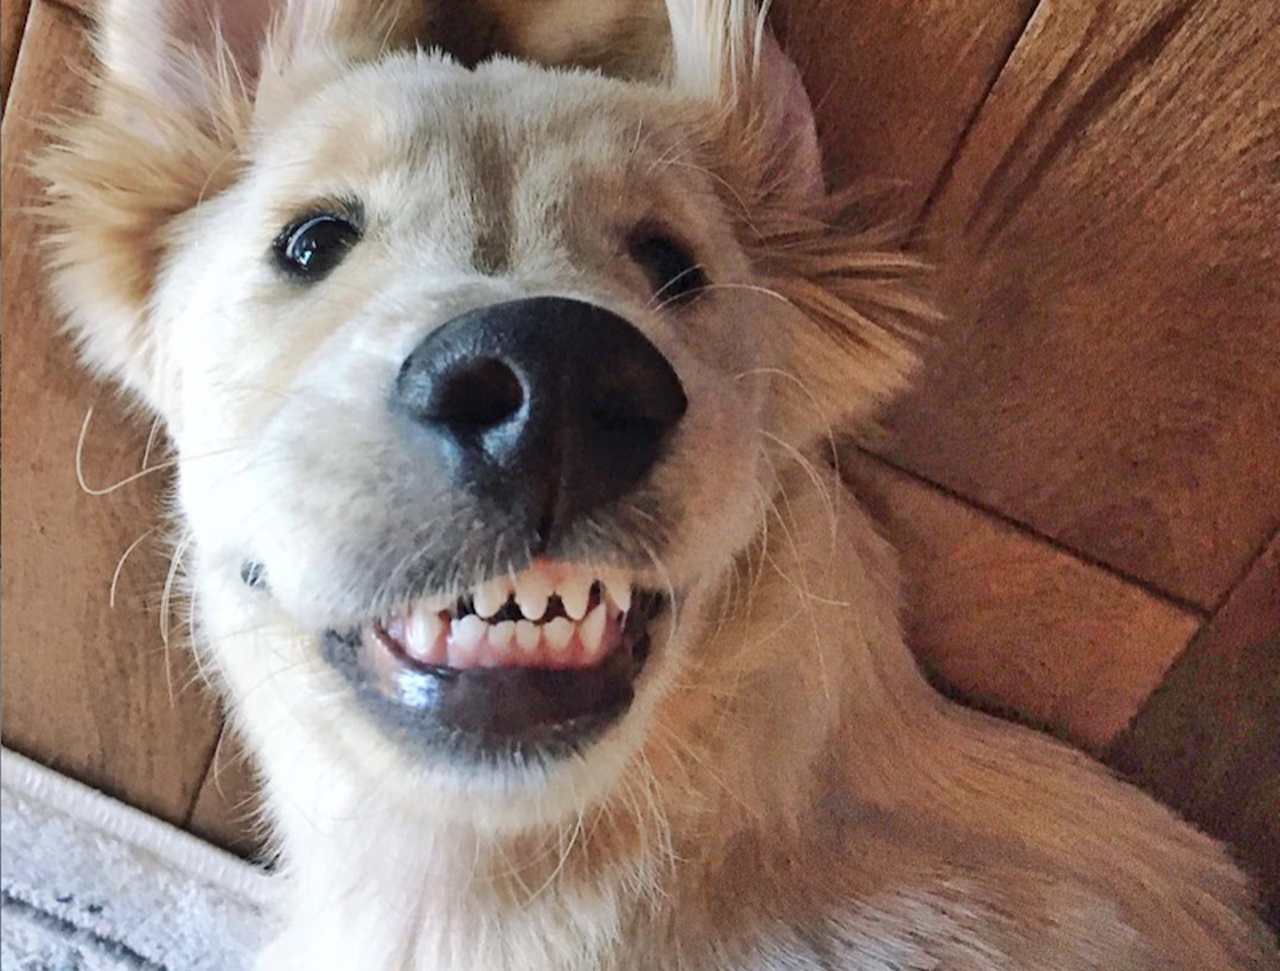 Louie
OMG that smile is the best.
Photo via @louie.thegolden